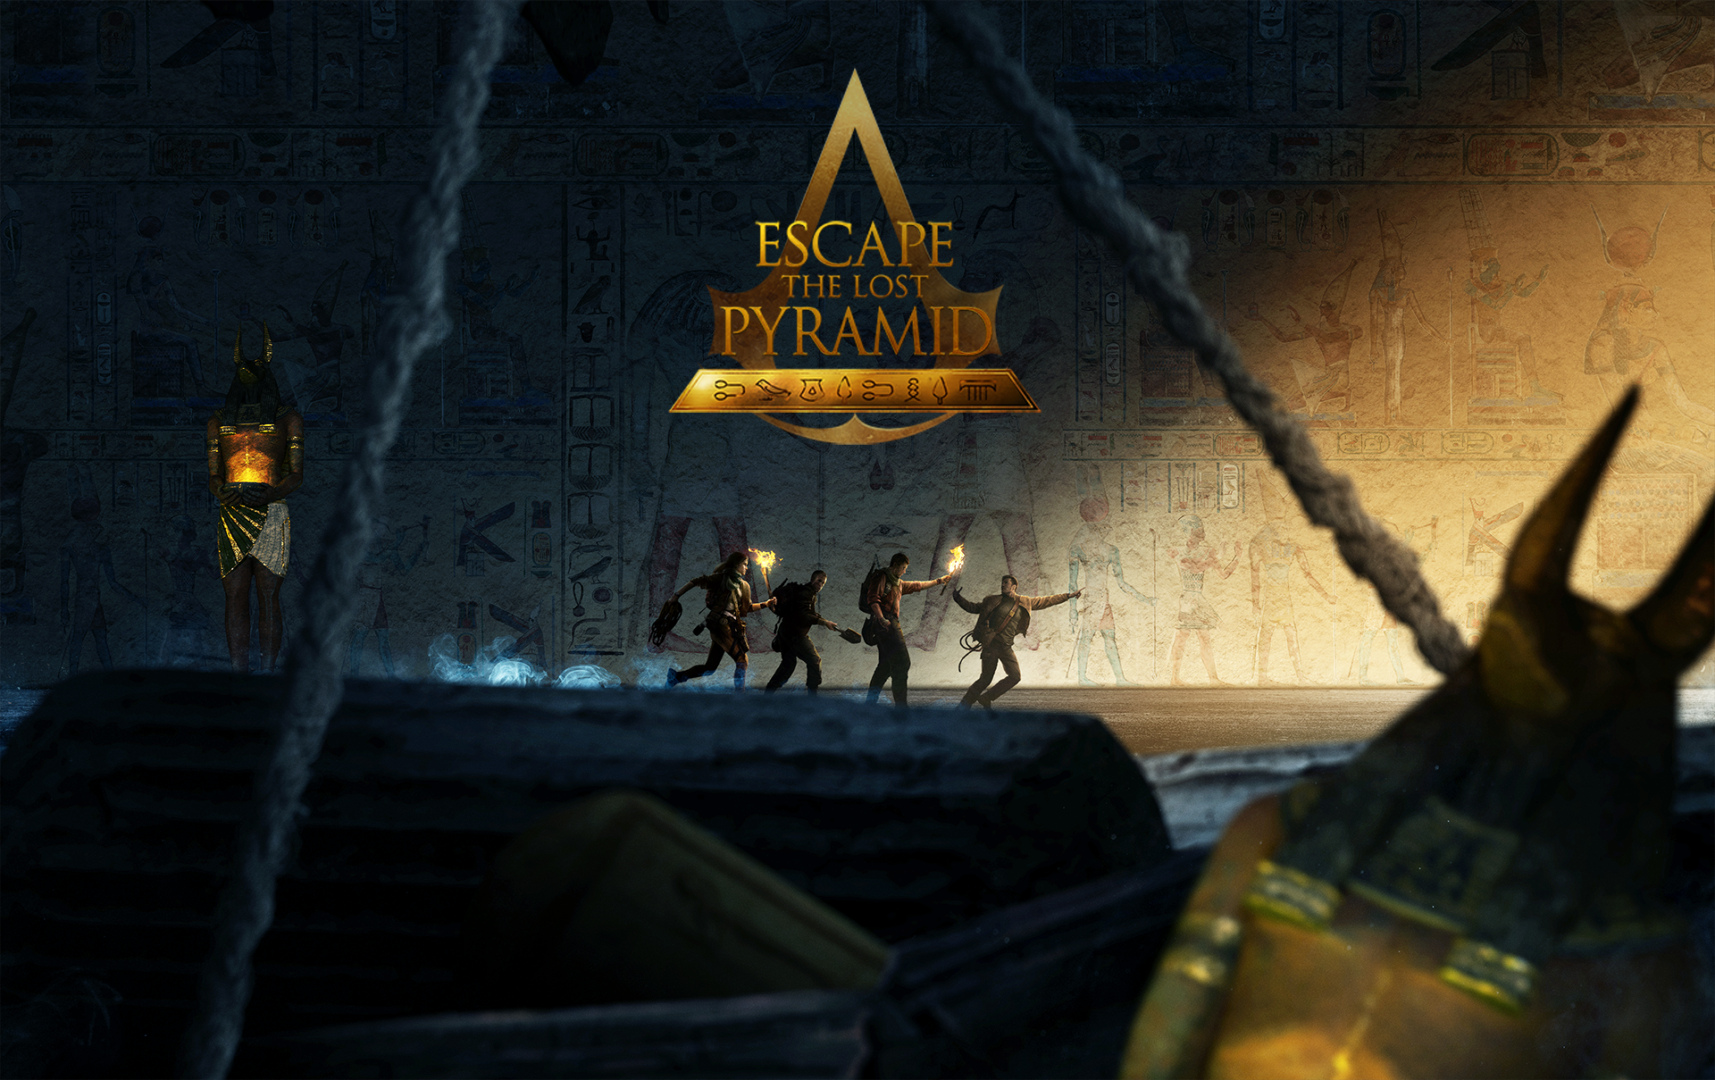 Escape The Lost Pyramid is an escape game in Virtual Reality, taking place in the world of Assassin’s Creed Origins.